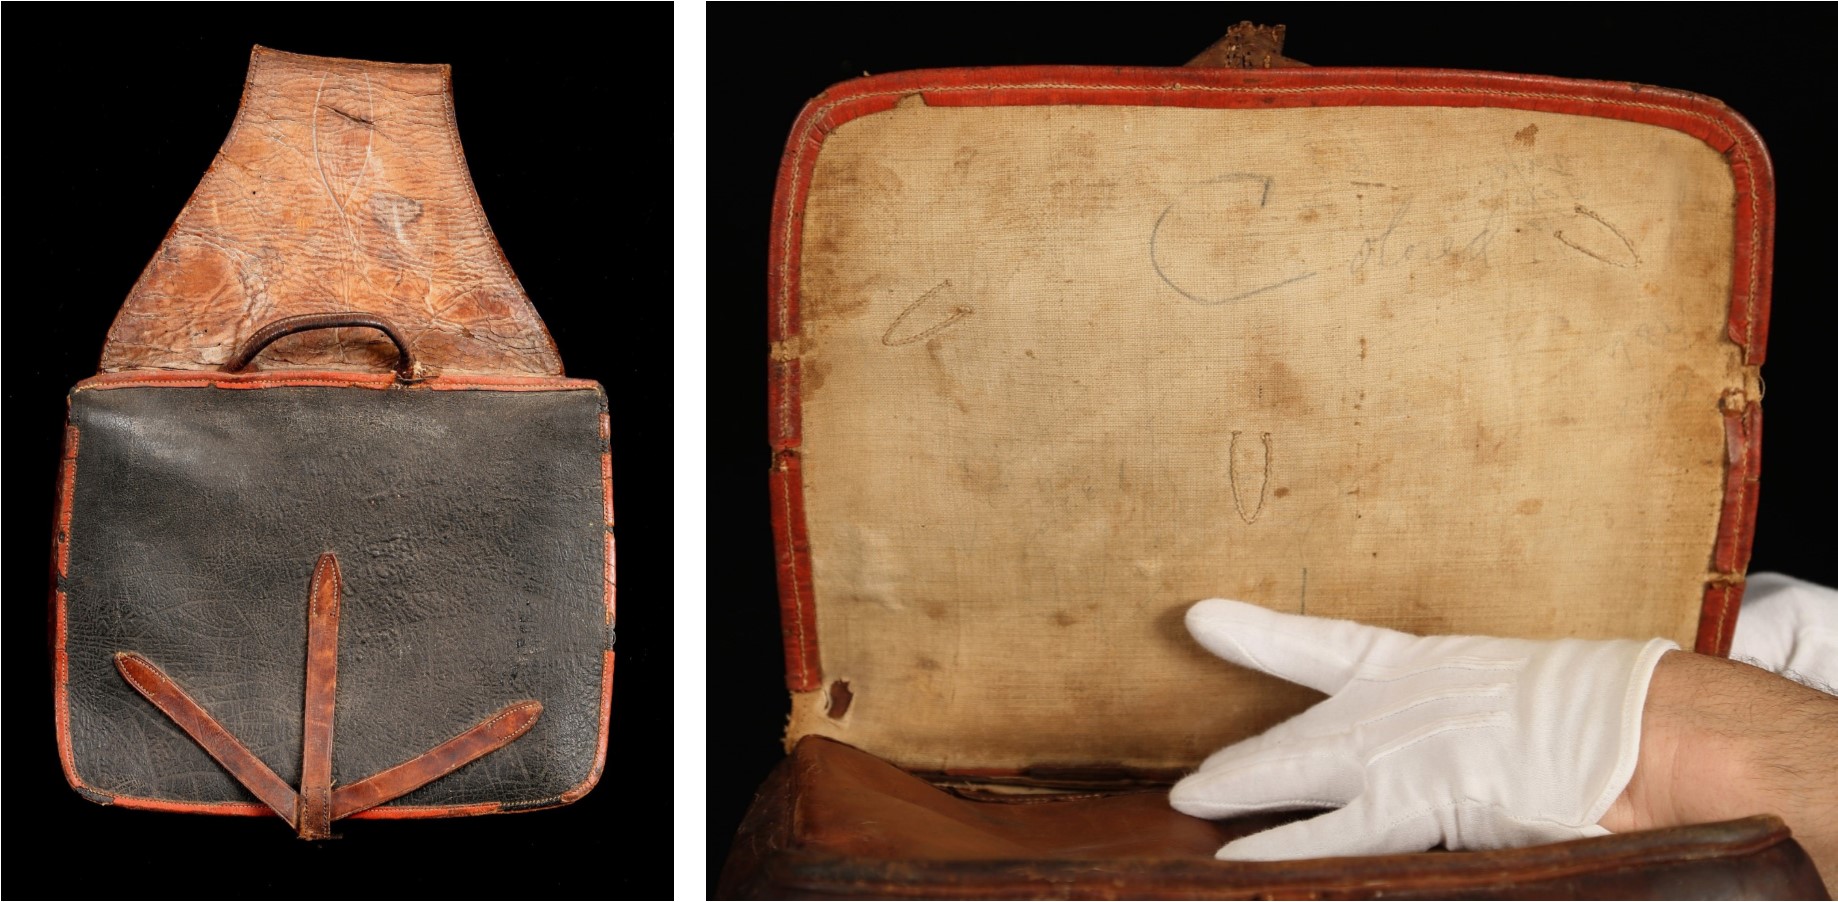 Two images: (left) photograph of worn black leather bag with brown handle and embellishments; right image is photograph of a gloved hand holding the bag open, where the word “Colored” is handwritten on the flap.